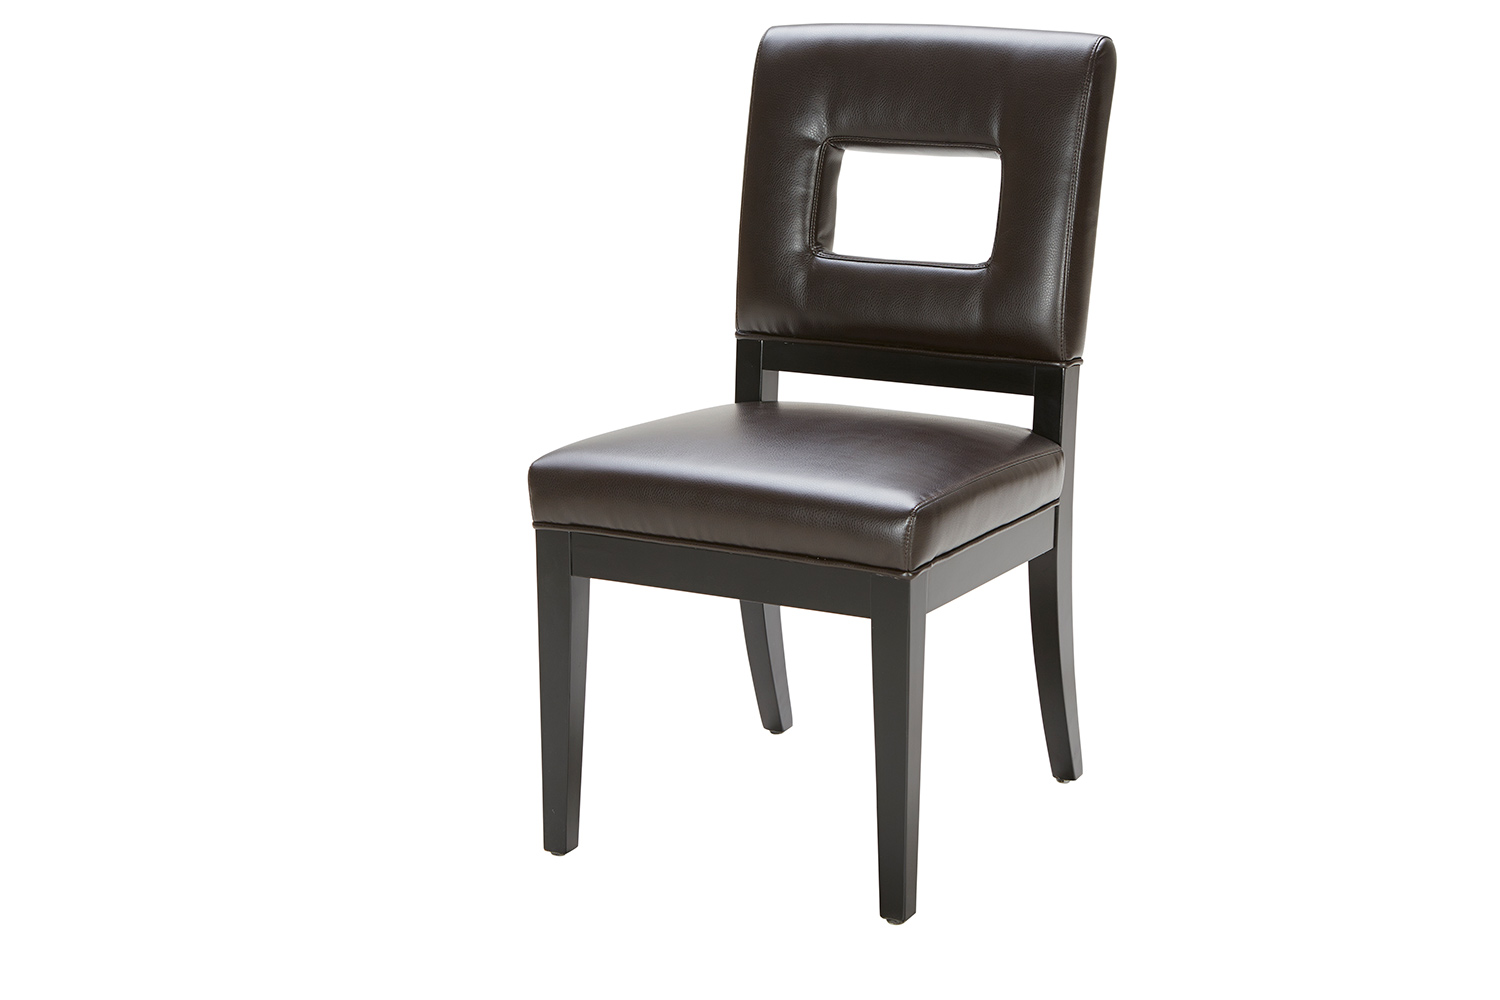 ELEMENTS Fine Home Furnishings Savy 2 Piece Dining Chairs - Truffle